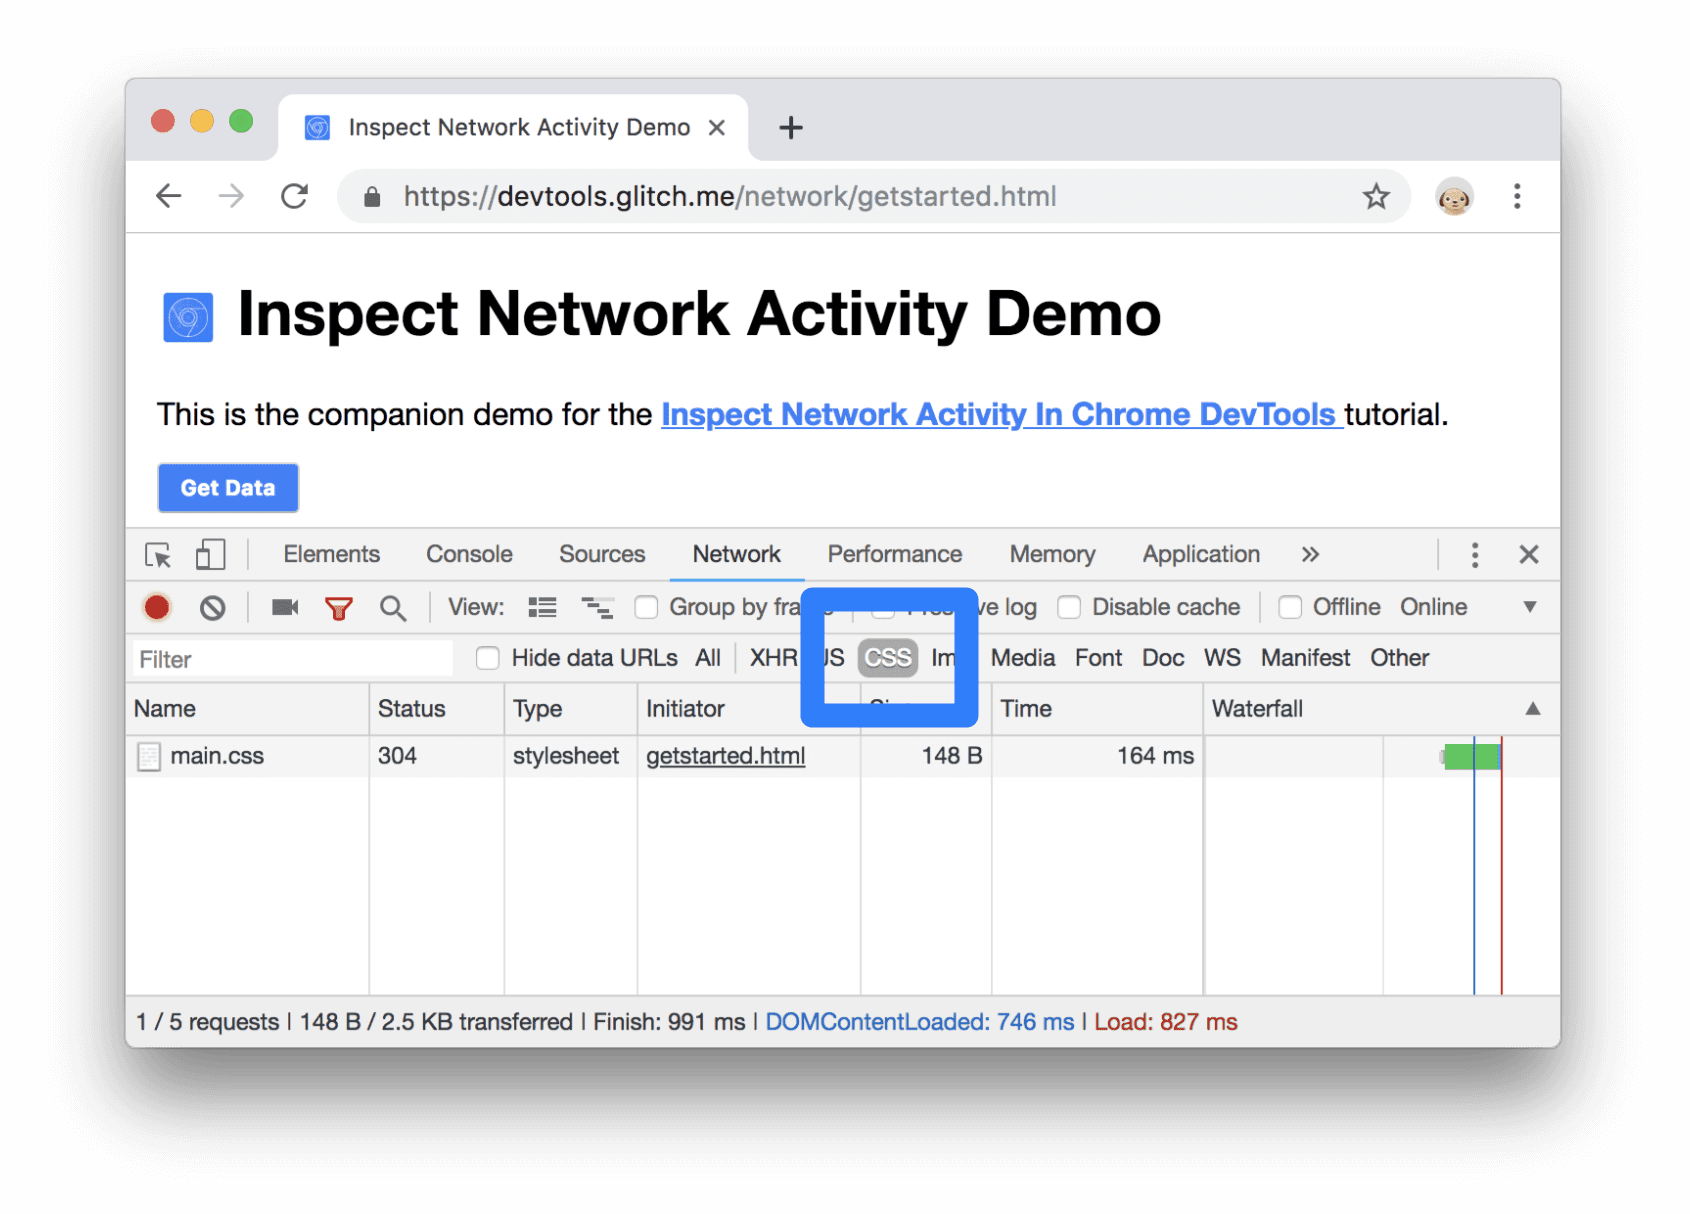 Filtering for CSS in the Network Log